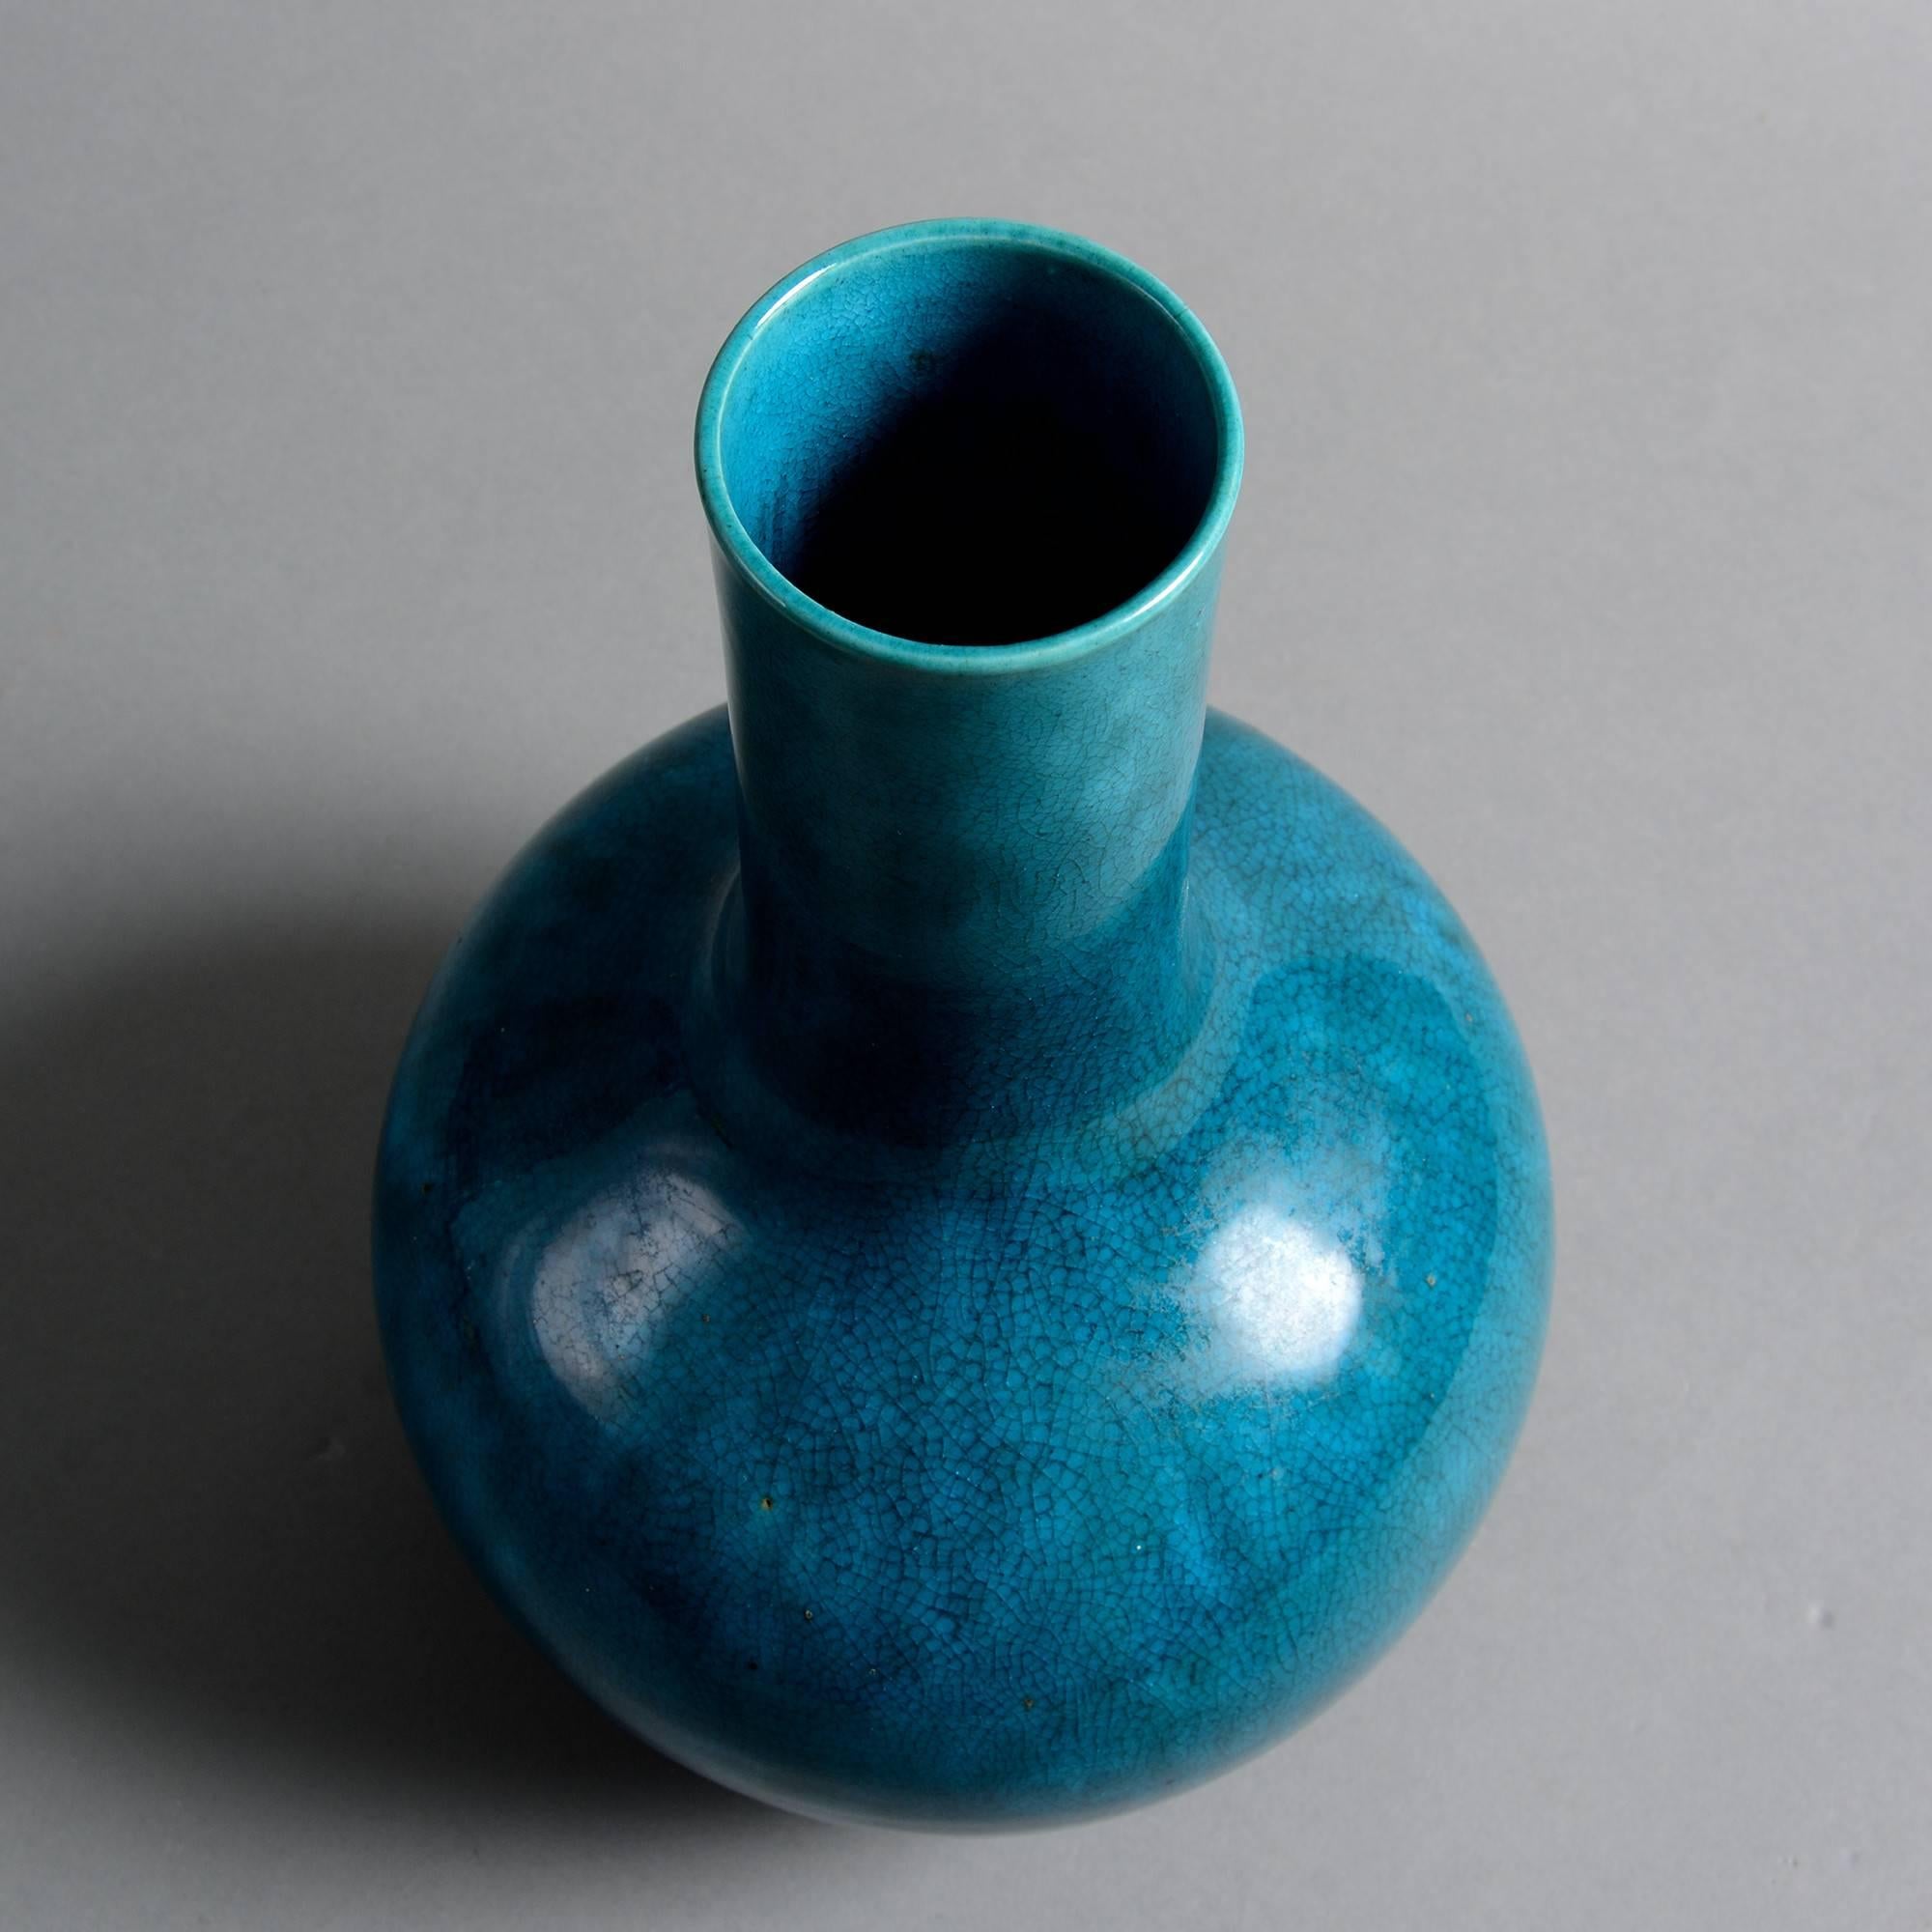 A mid-19th century porcelain bottle vase with turquoise glaze.

Qing Dynasty. Daoguang period.